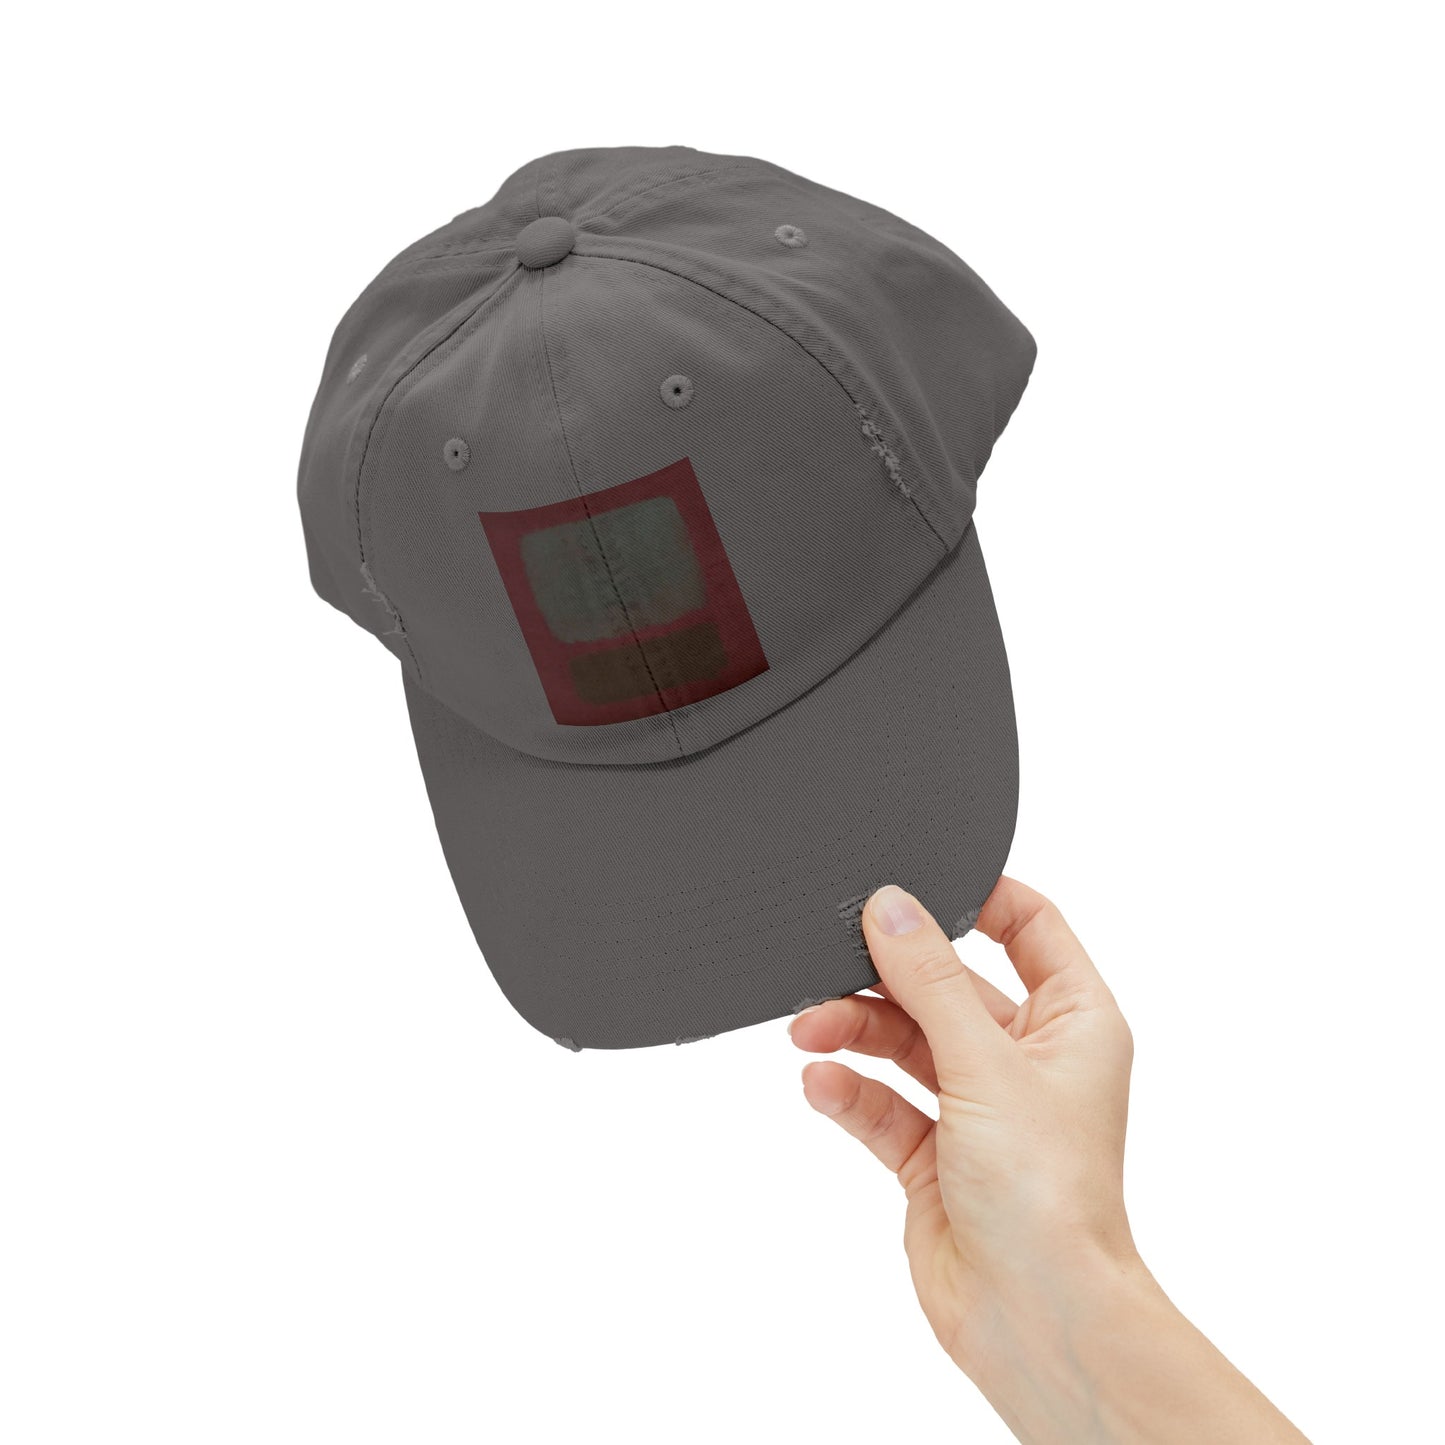 a person holding up a gray hat with a red square on it